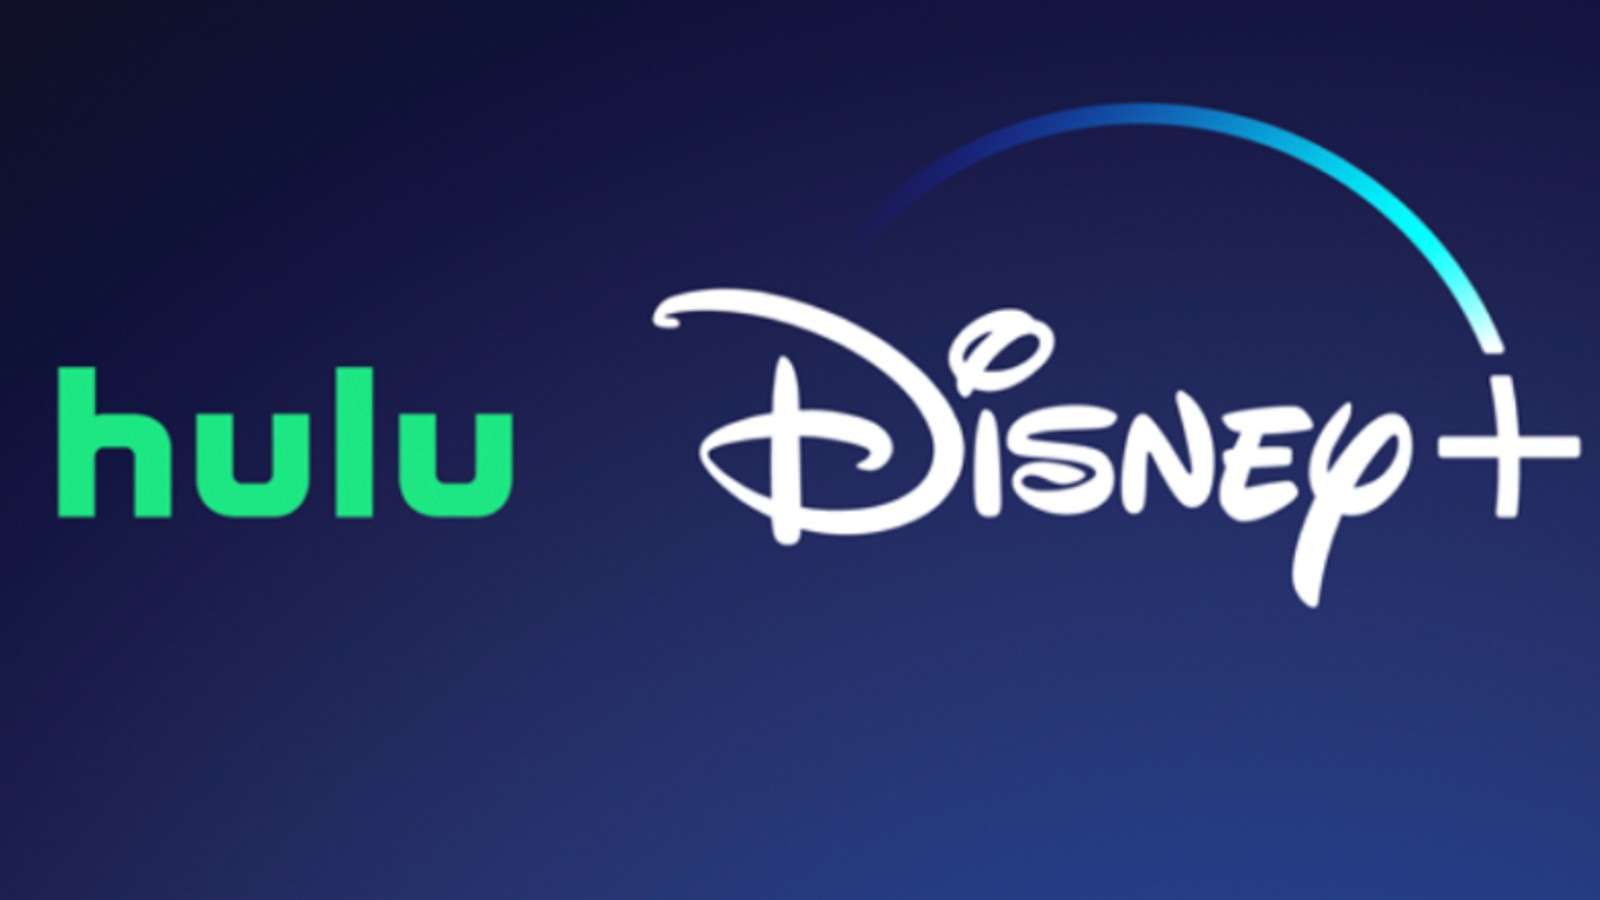 The logos for Hulu and Disney Plus